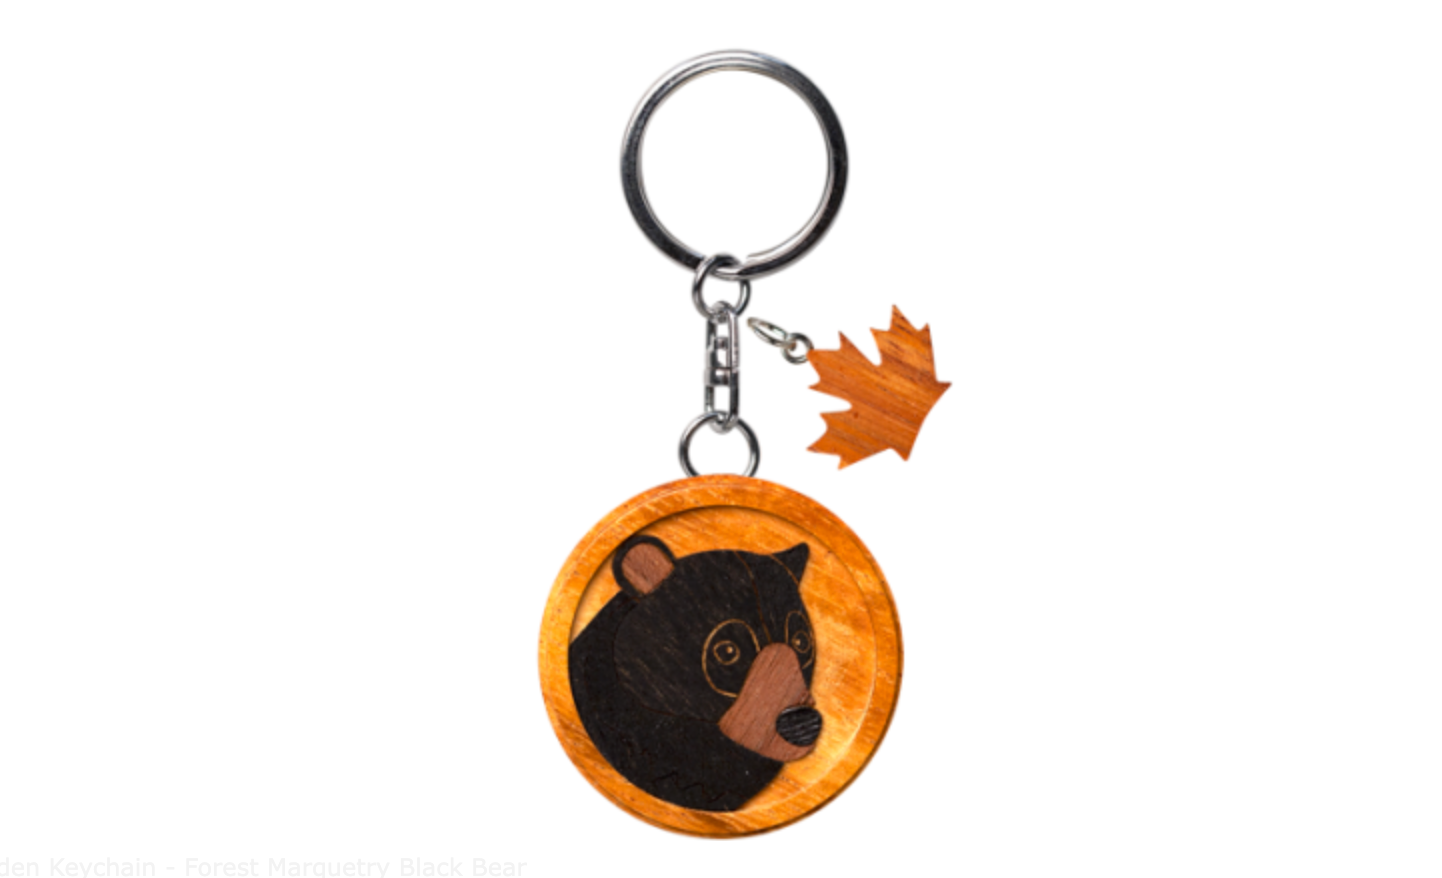 Handcrafted wooden keychain featuring a forest marquetry design with a black bear motif, a stylish and nature-inspired accessory for your keys